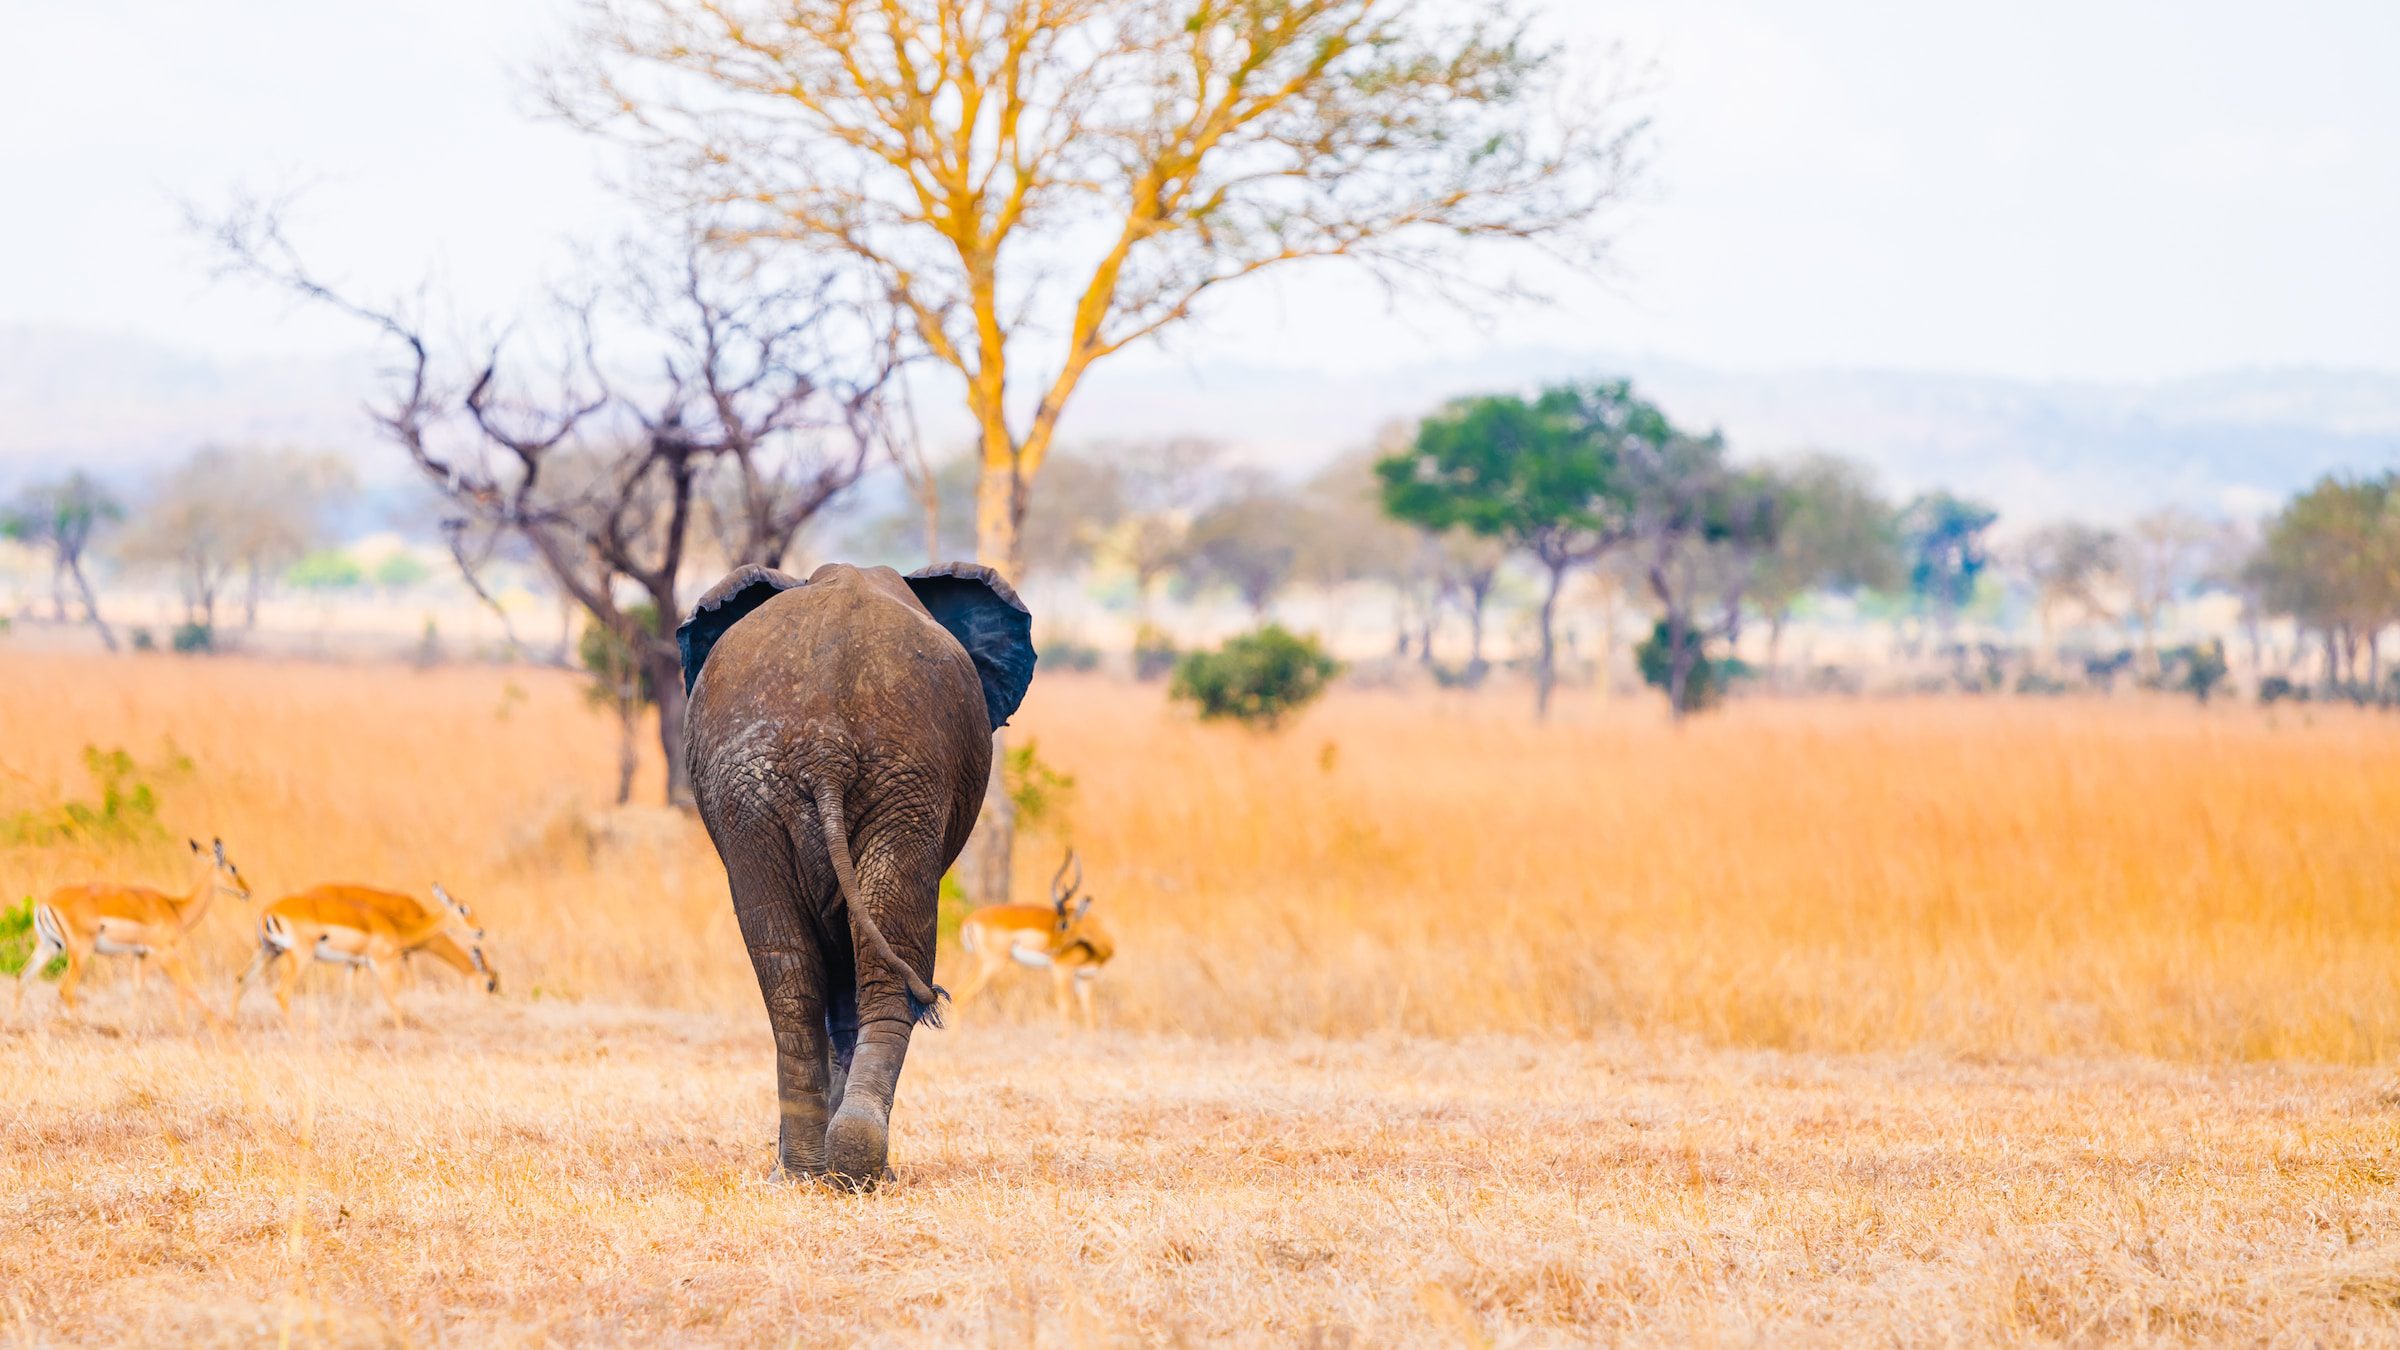 Elephant at the Mikumi National Park in Tanzania taking a stroll.